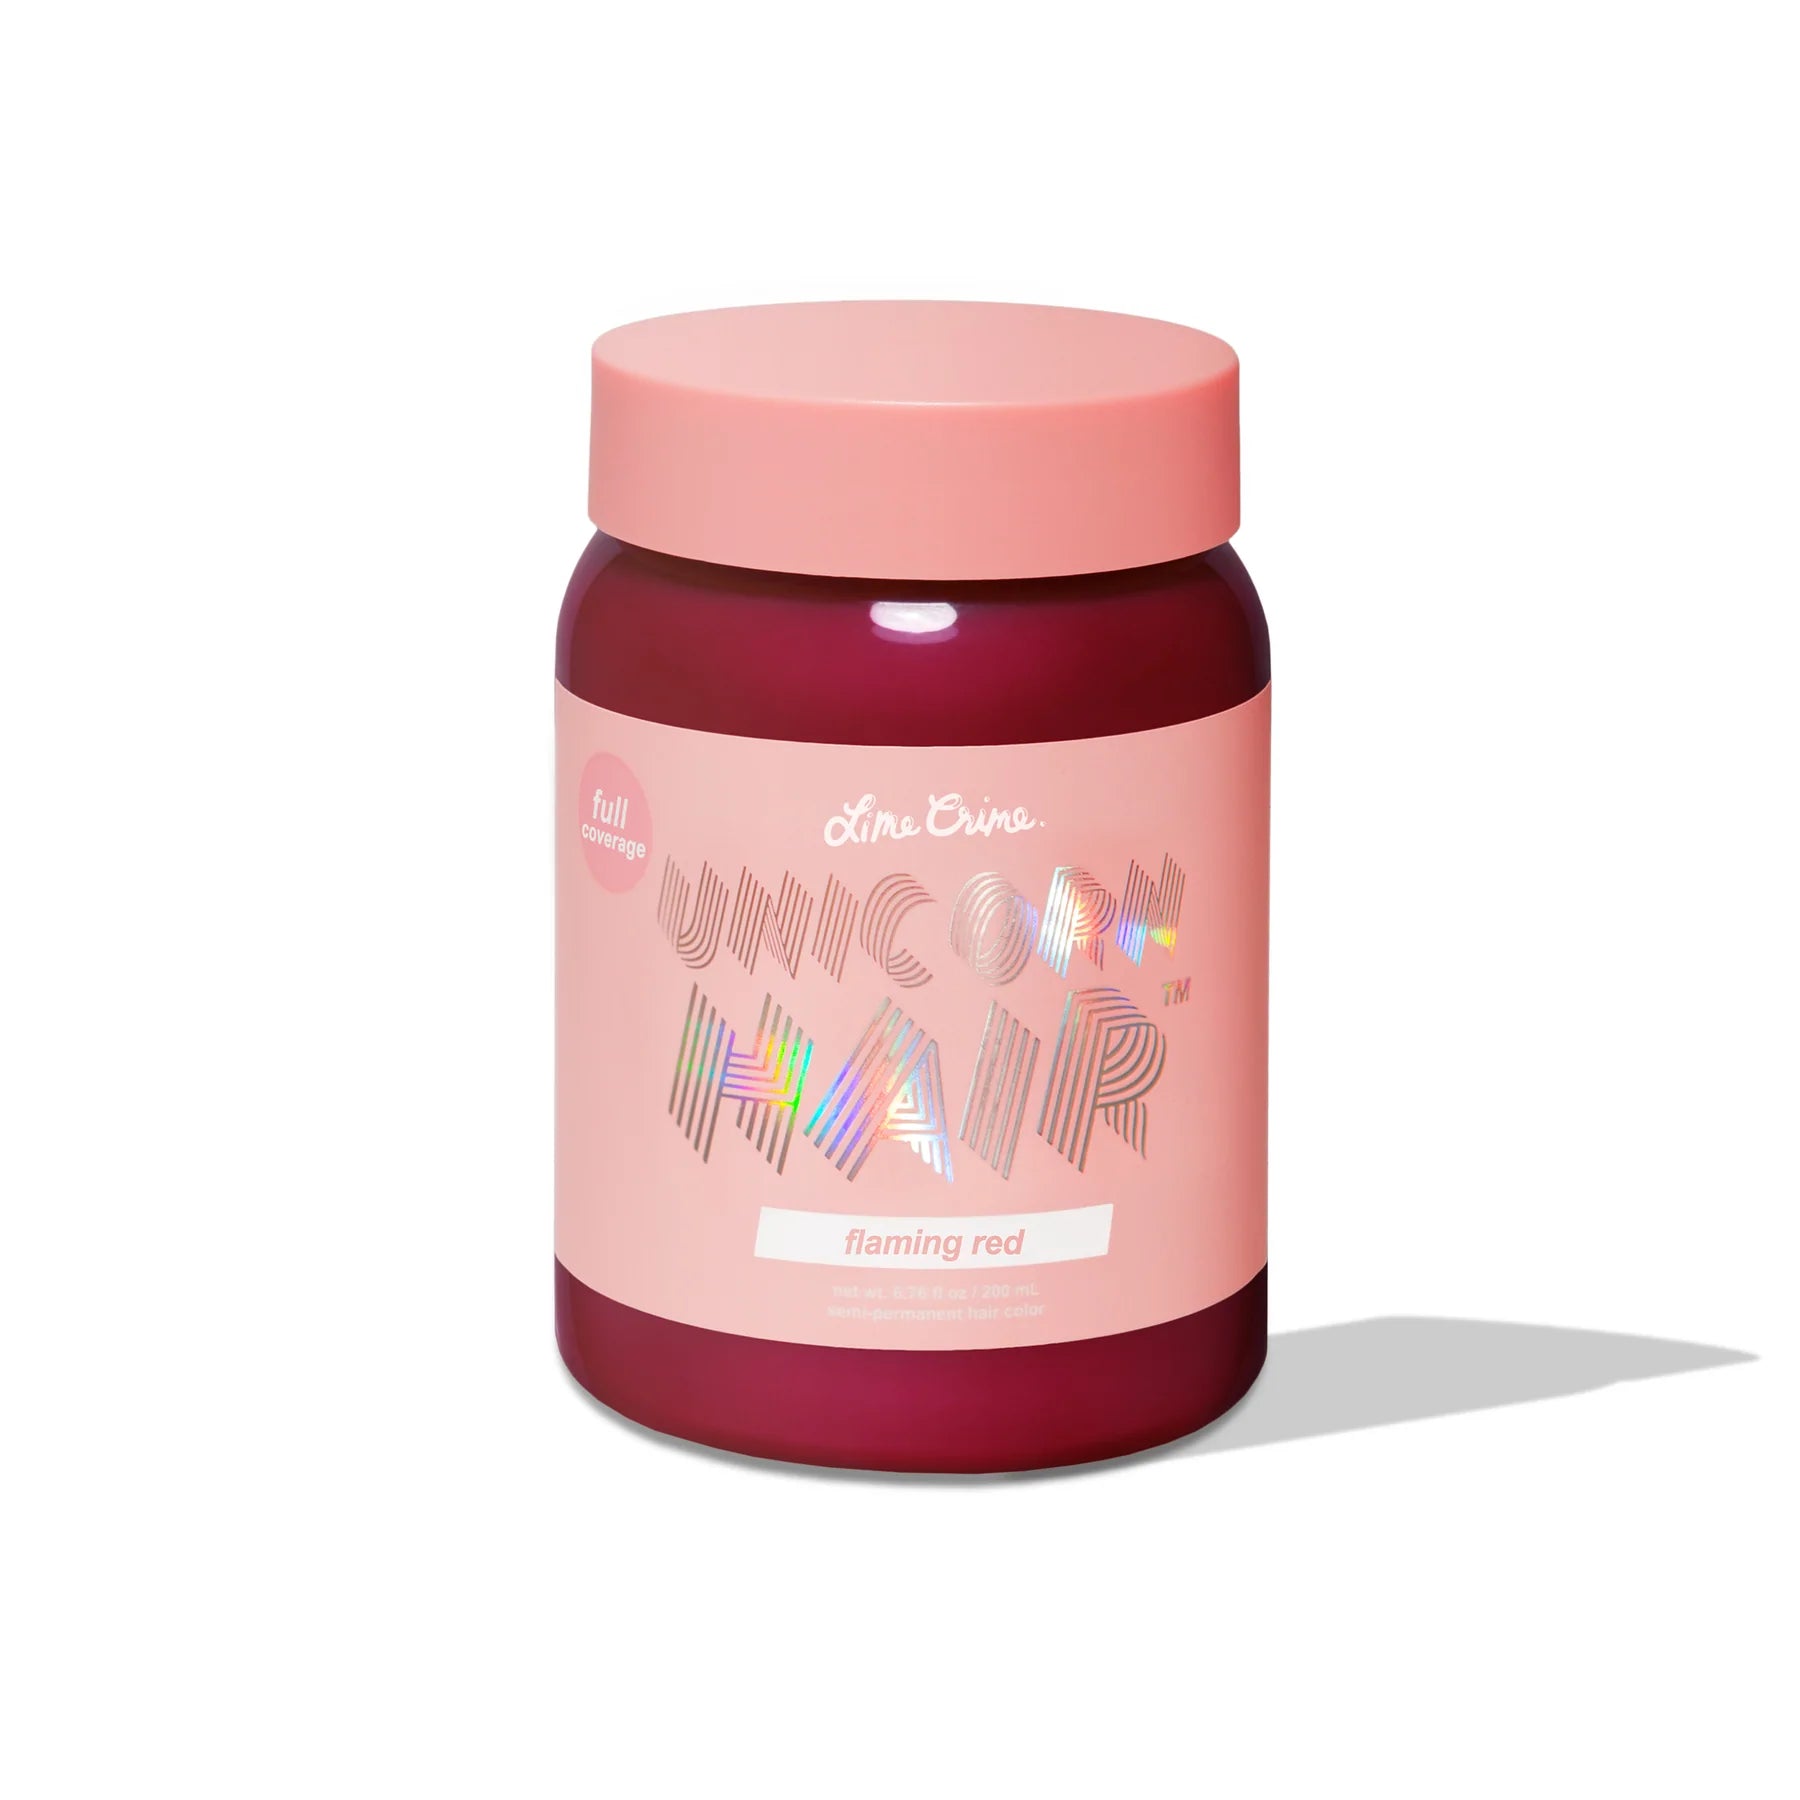 Lime Crime - Unicorn Hair Flaming Red